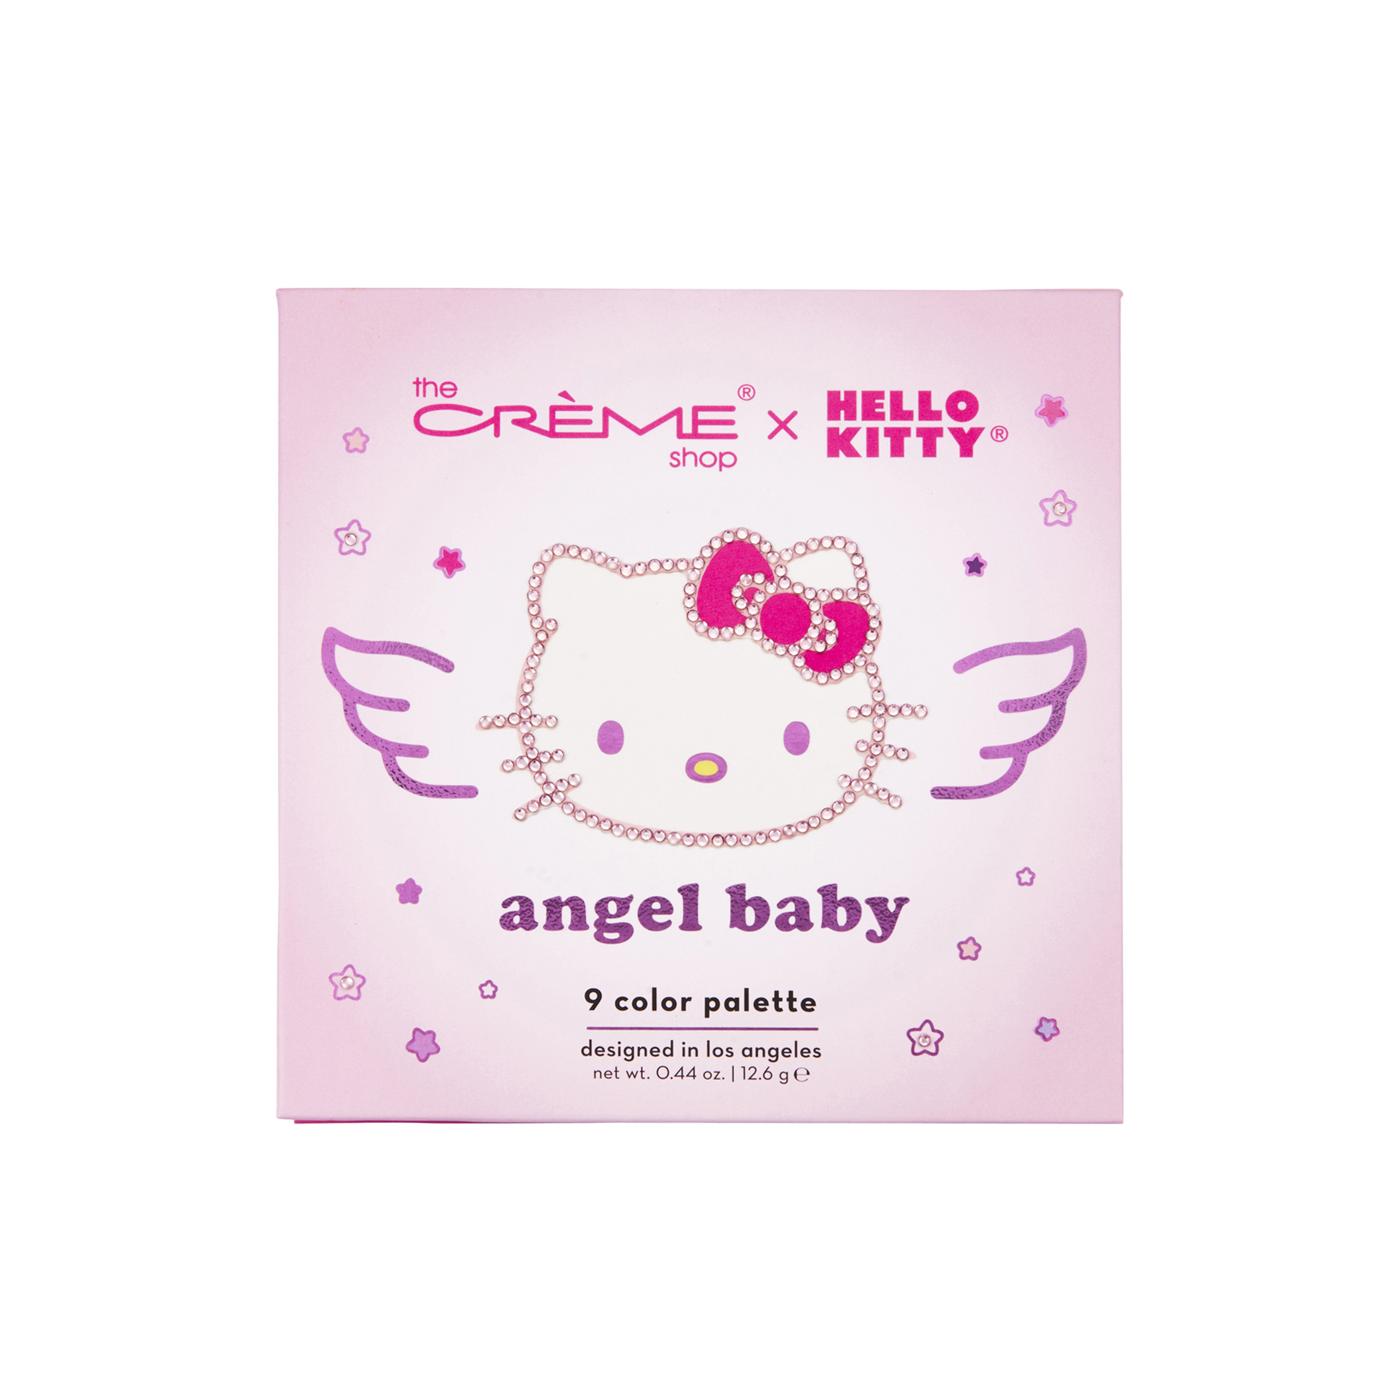 The Crème Shop Hello Kitty Angel Baby Color Eyeshadow Palette; image 1 of 2